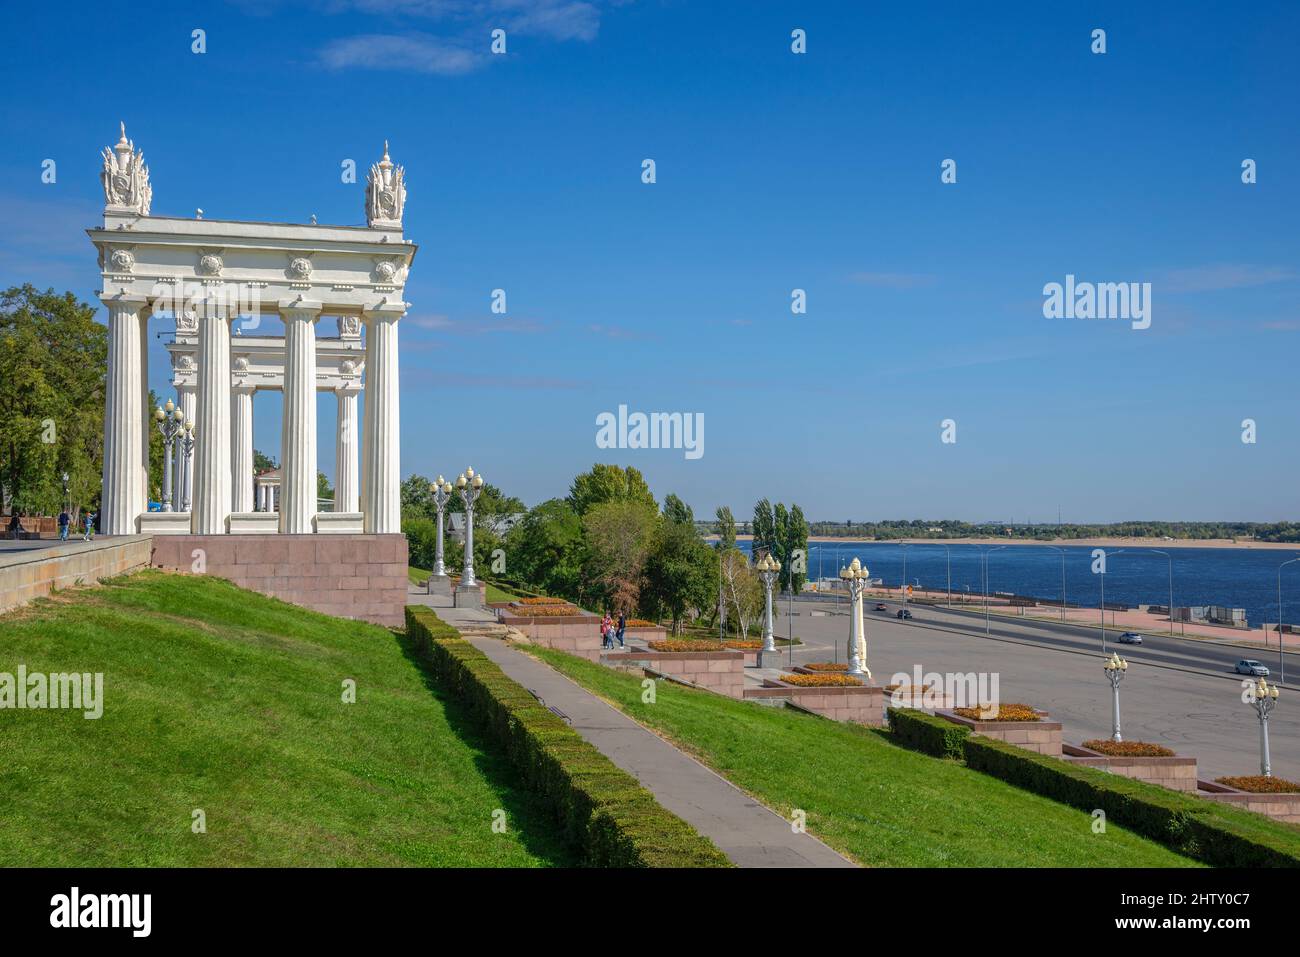 VOLGOGRAD, RUSSIA - SEPTEMBER 19, 2021: View of the embankment of the city of Volgograd on a sunny September day Stock Photo